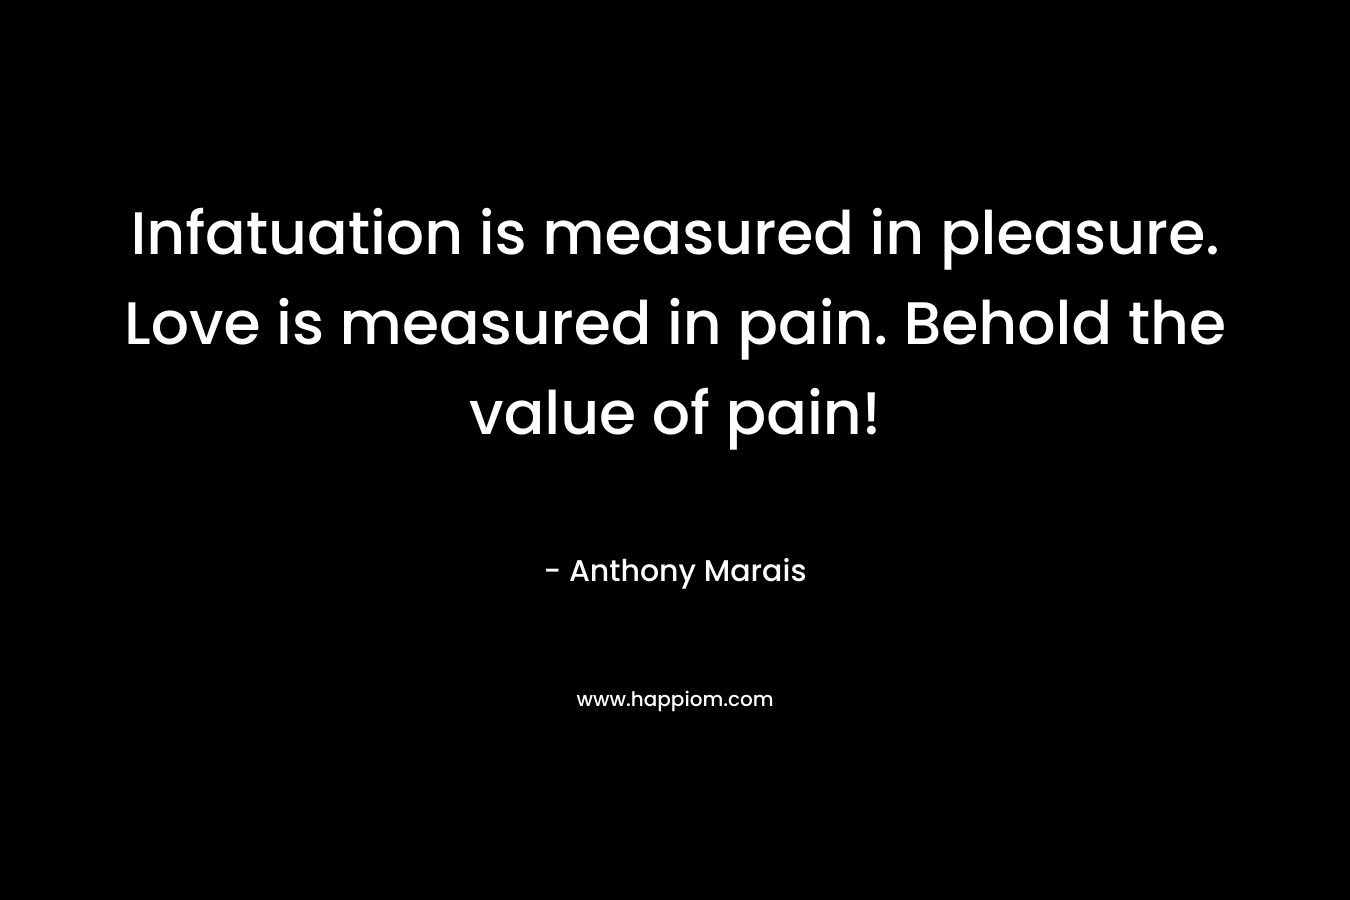 Infatuation is measured in pleasure. Love is measured in pain. Behold the value of pain! – Anthony Marais